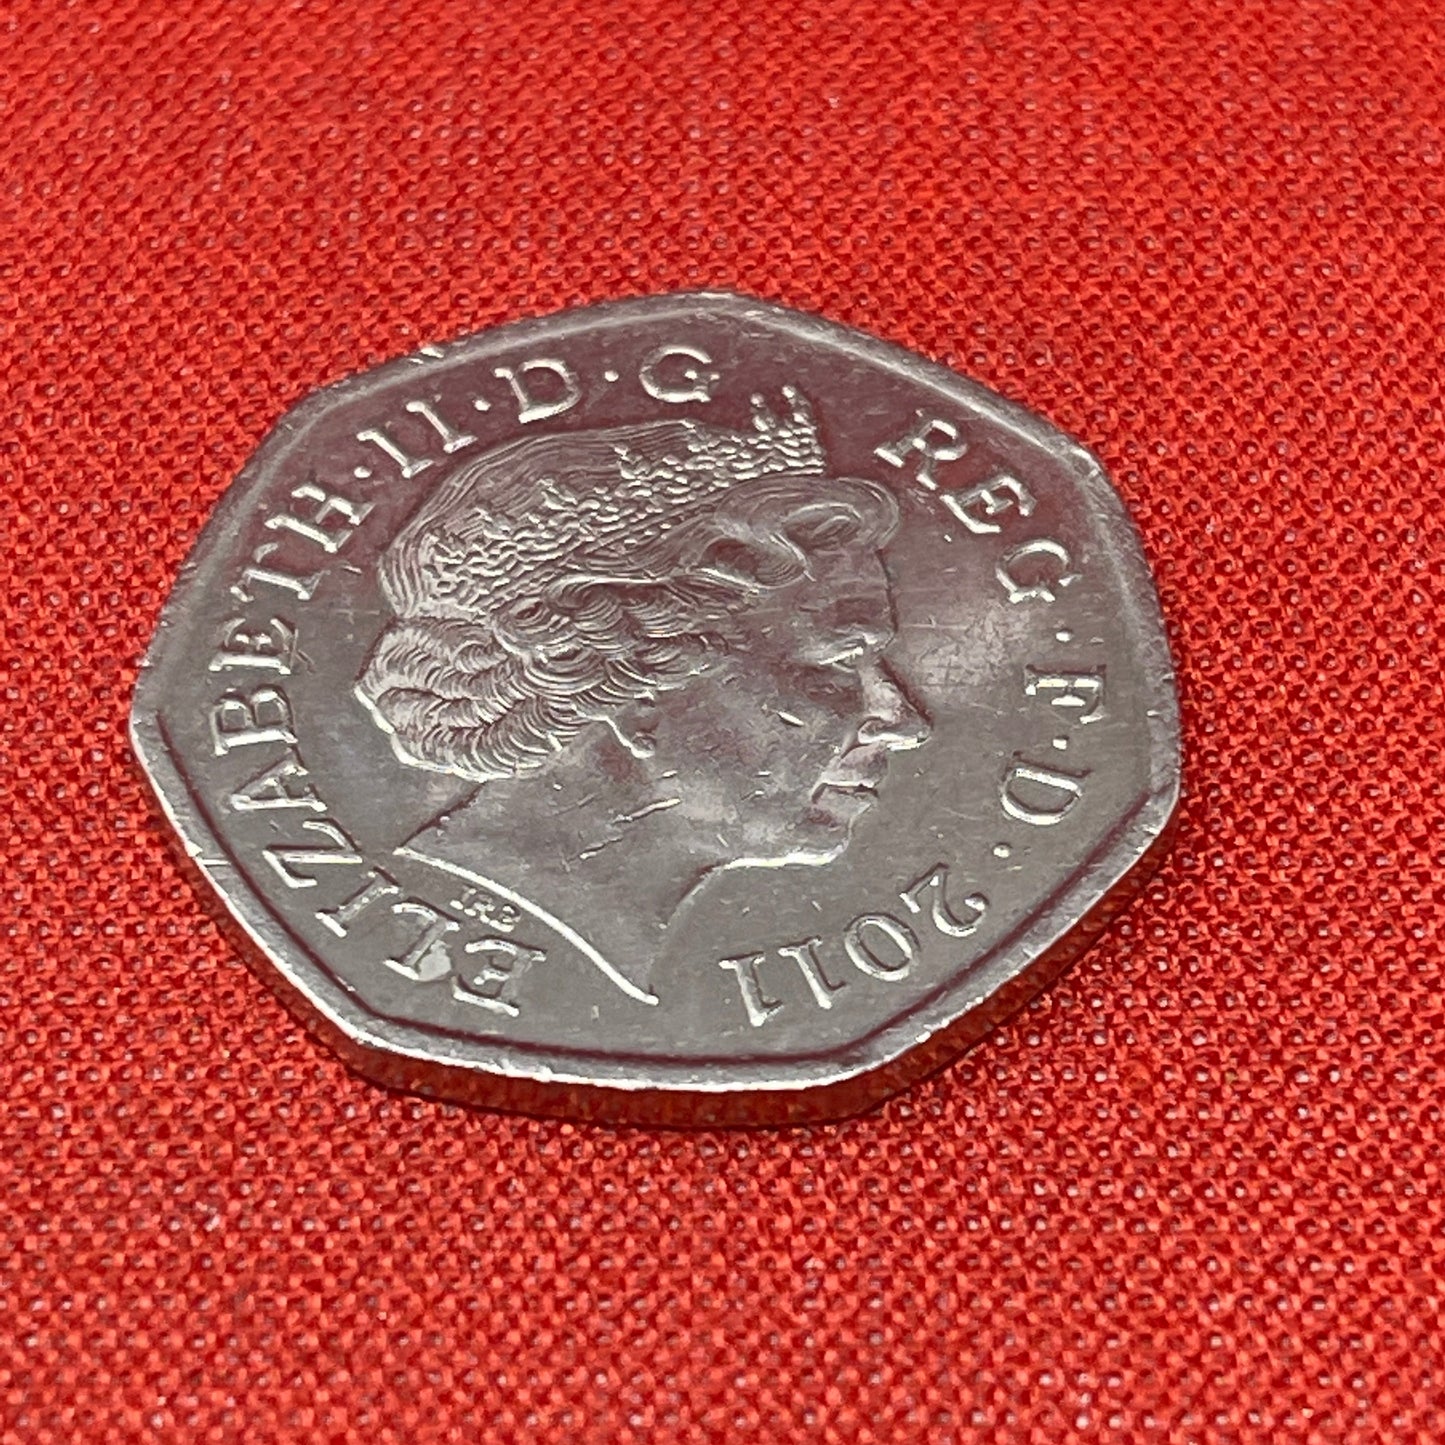 Official Olympic London 2012 Table Tennis 50p